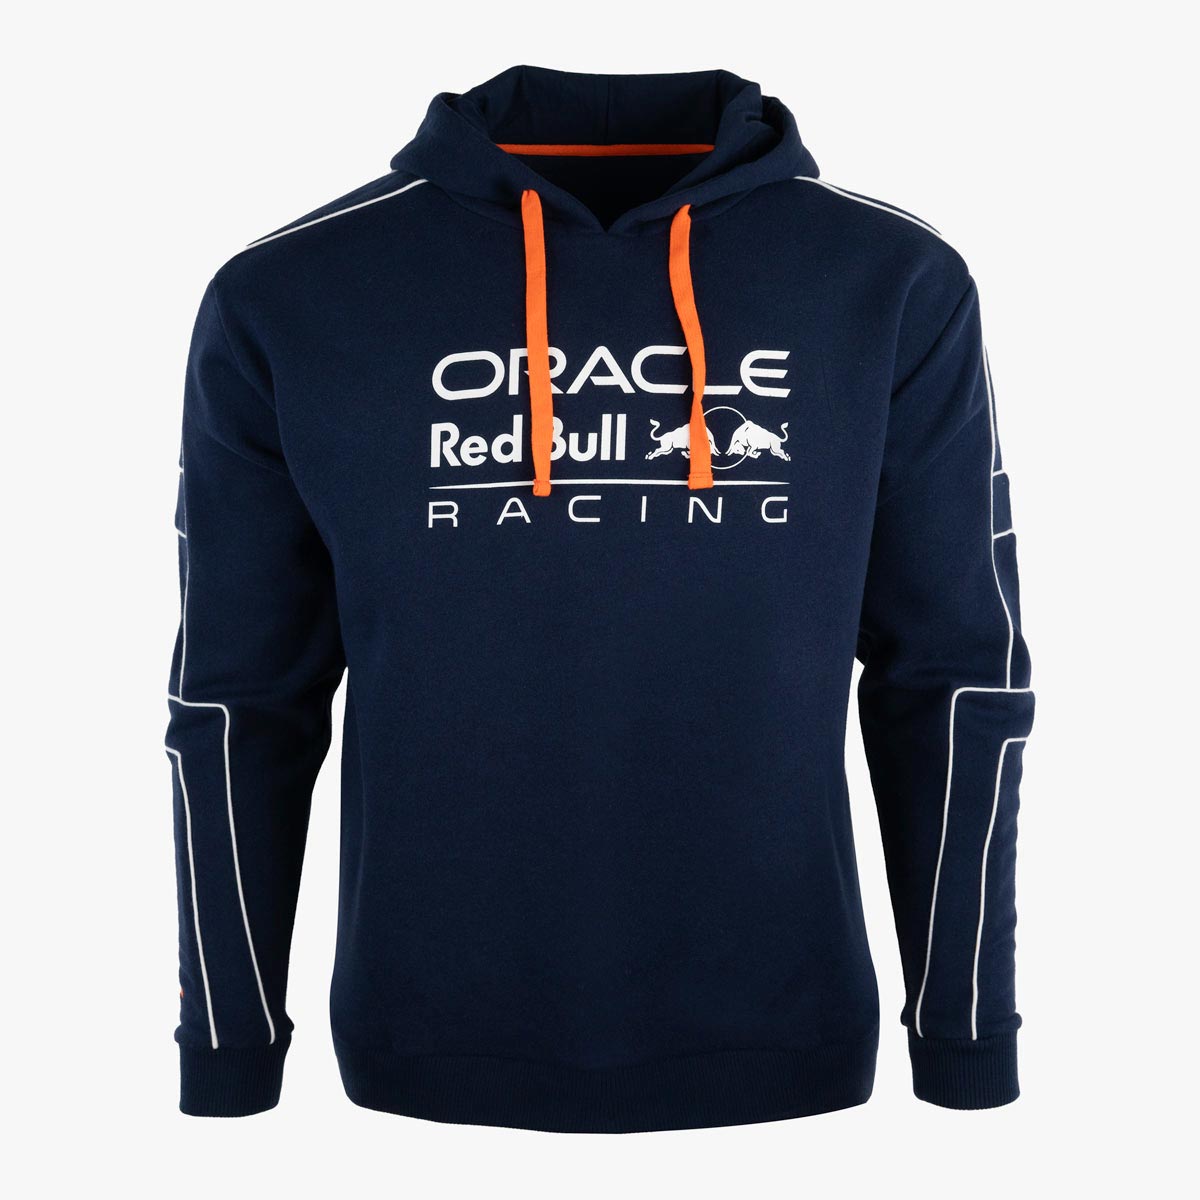 Oracle Red Bull Hoodie in Navy with Contrast White Racer Piping image number 1